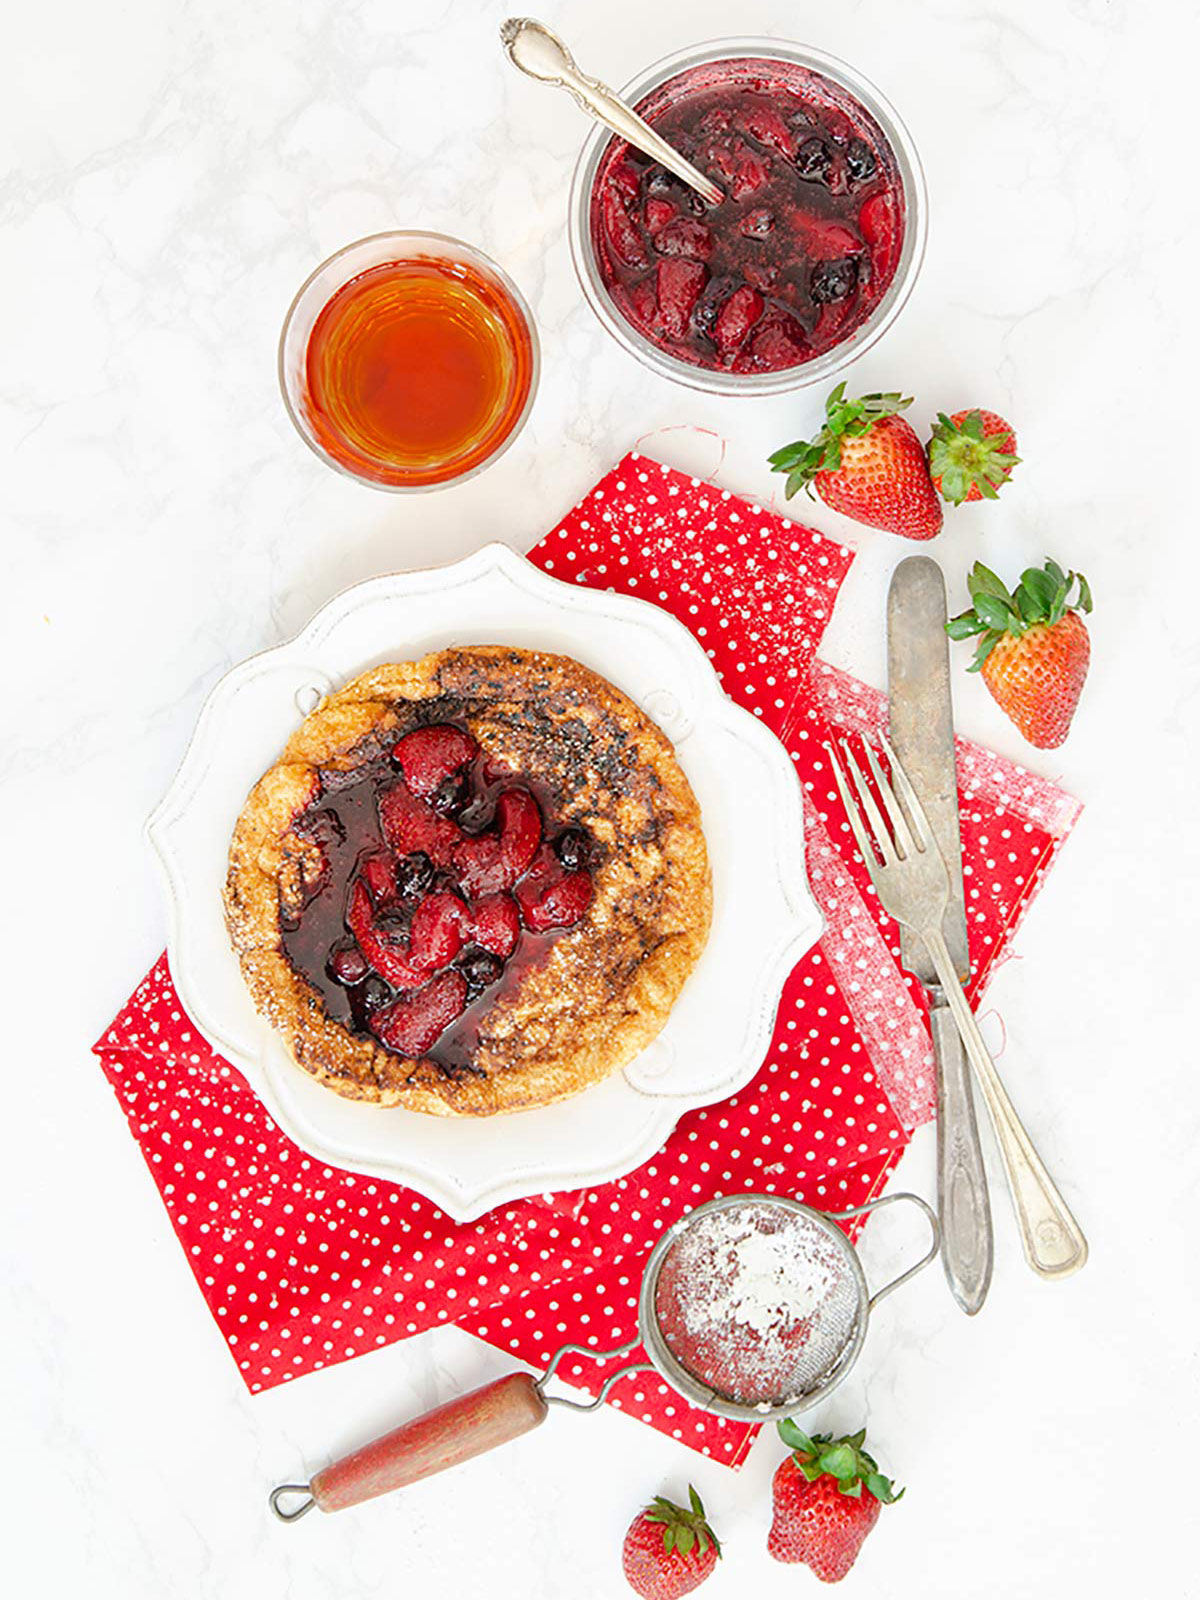 Matzo meal pancake or bubula with fruit compote on top on a white plate with tea and compote on the side.